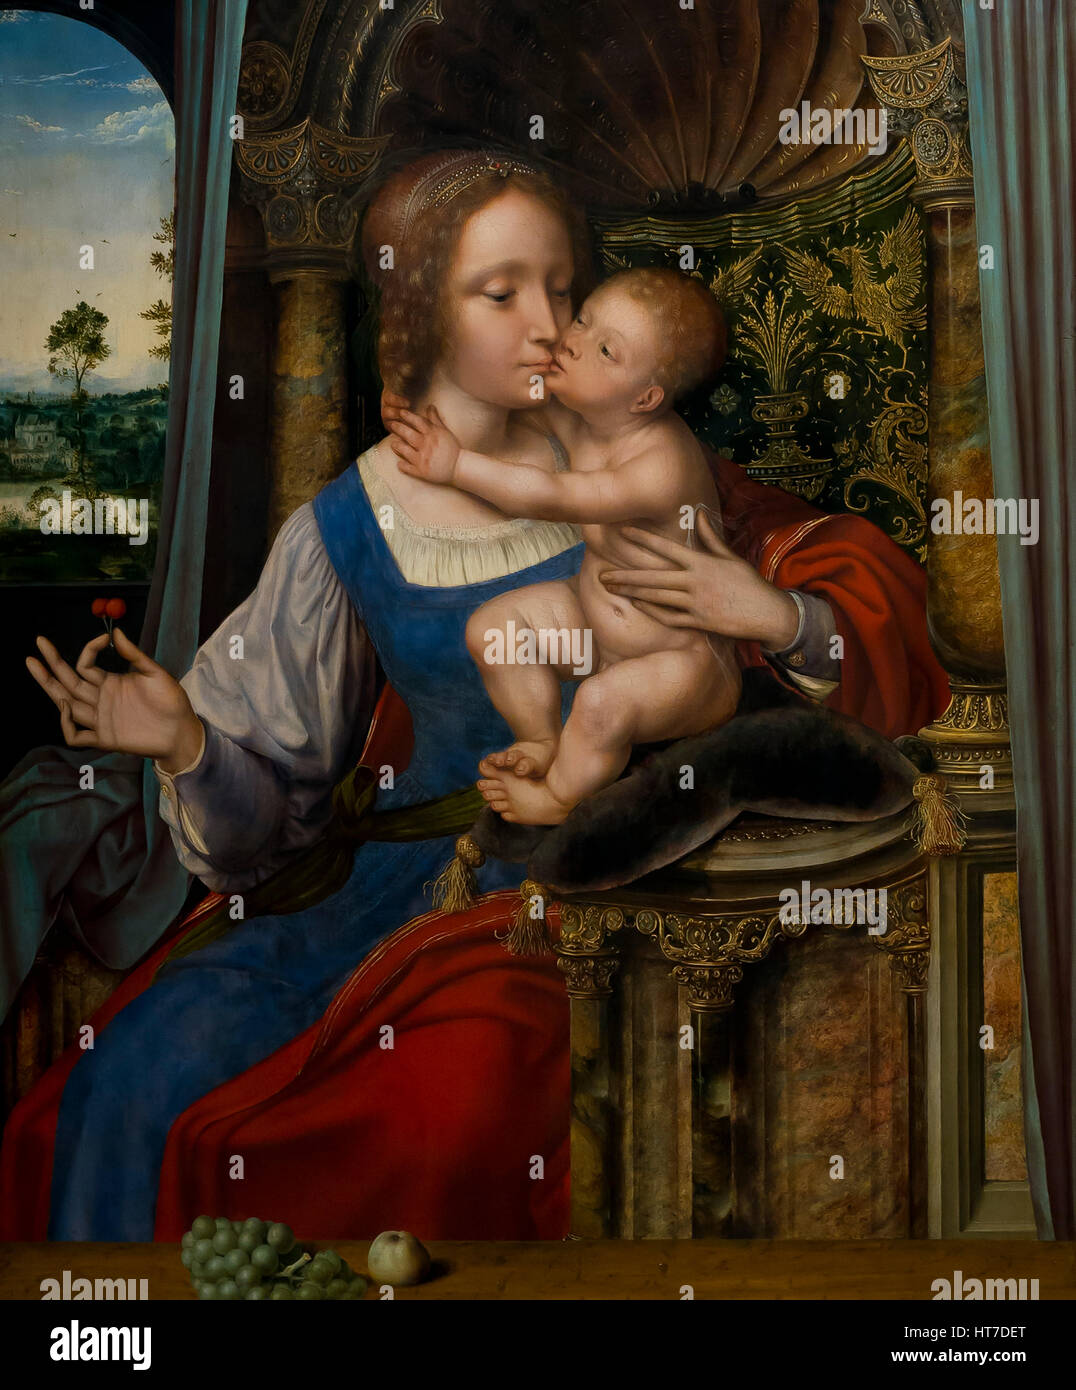 Madonna and Child, by Quentin Massys, circa 1525, Royal Art Gallery, Mauritshuis Museum, The Hague, Netherlands, Europe Stock Photo